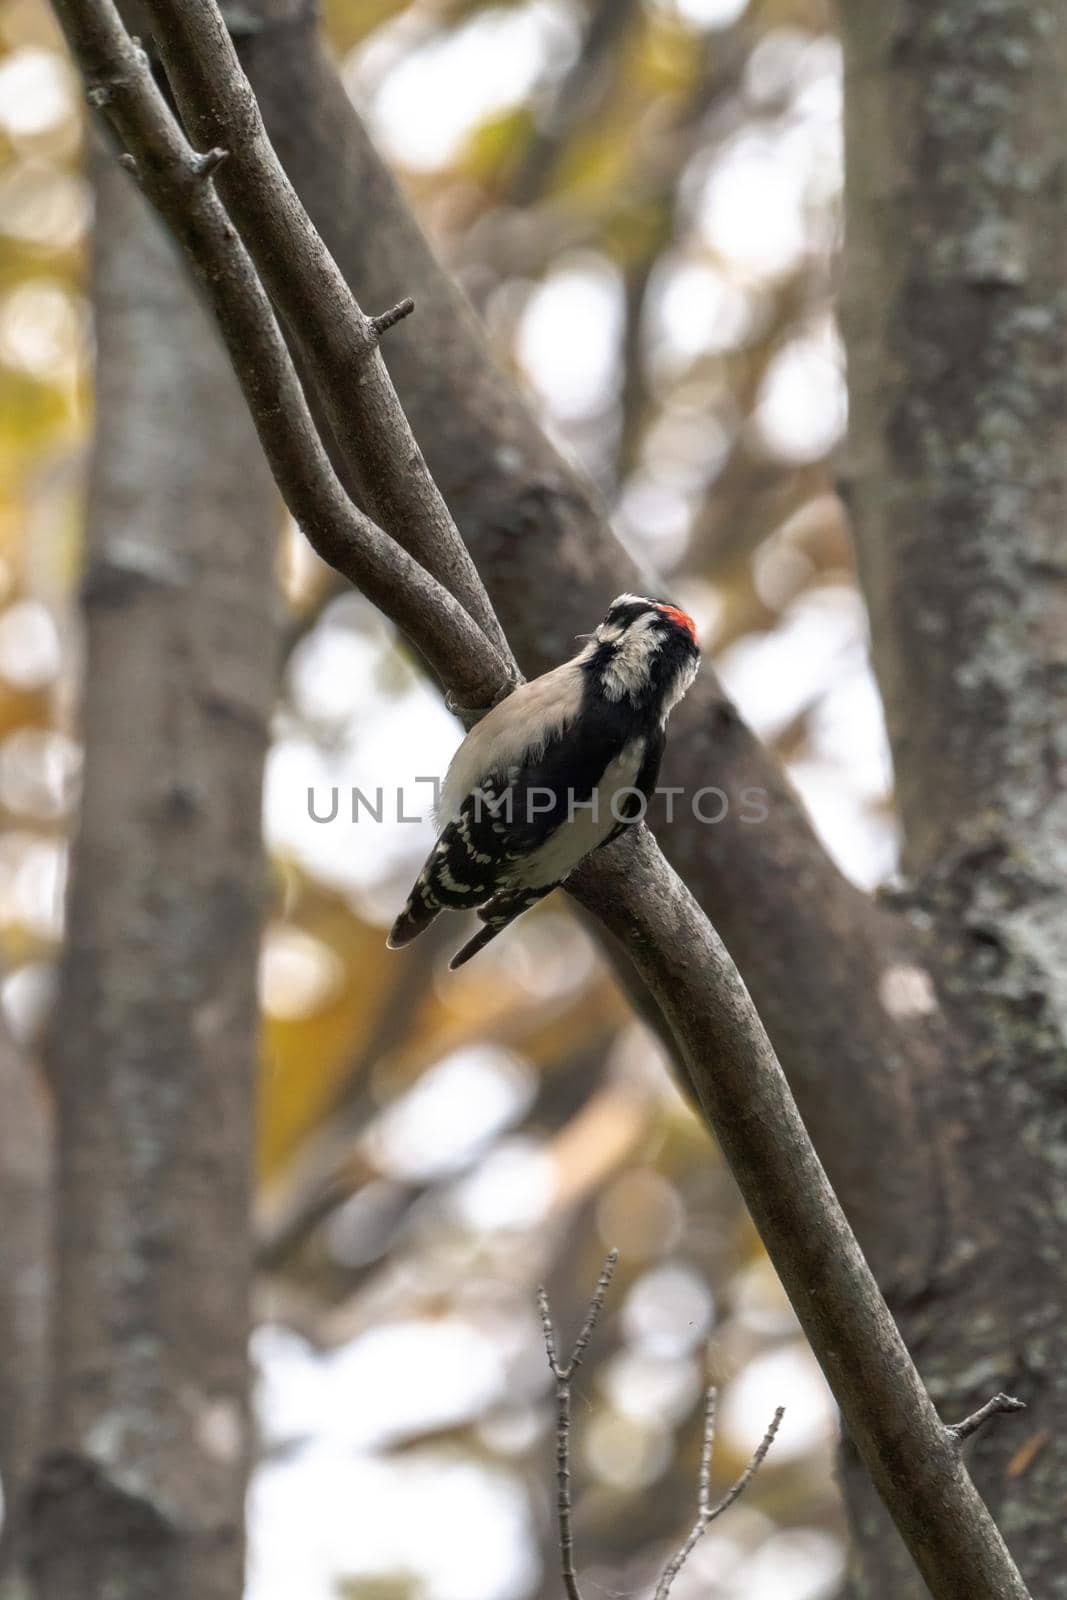 A close-up wildlife bird photograph of a male downy woodpecker clinging to a branch in the woods with other trees blurred in the background in the Midwest. by lapse_life